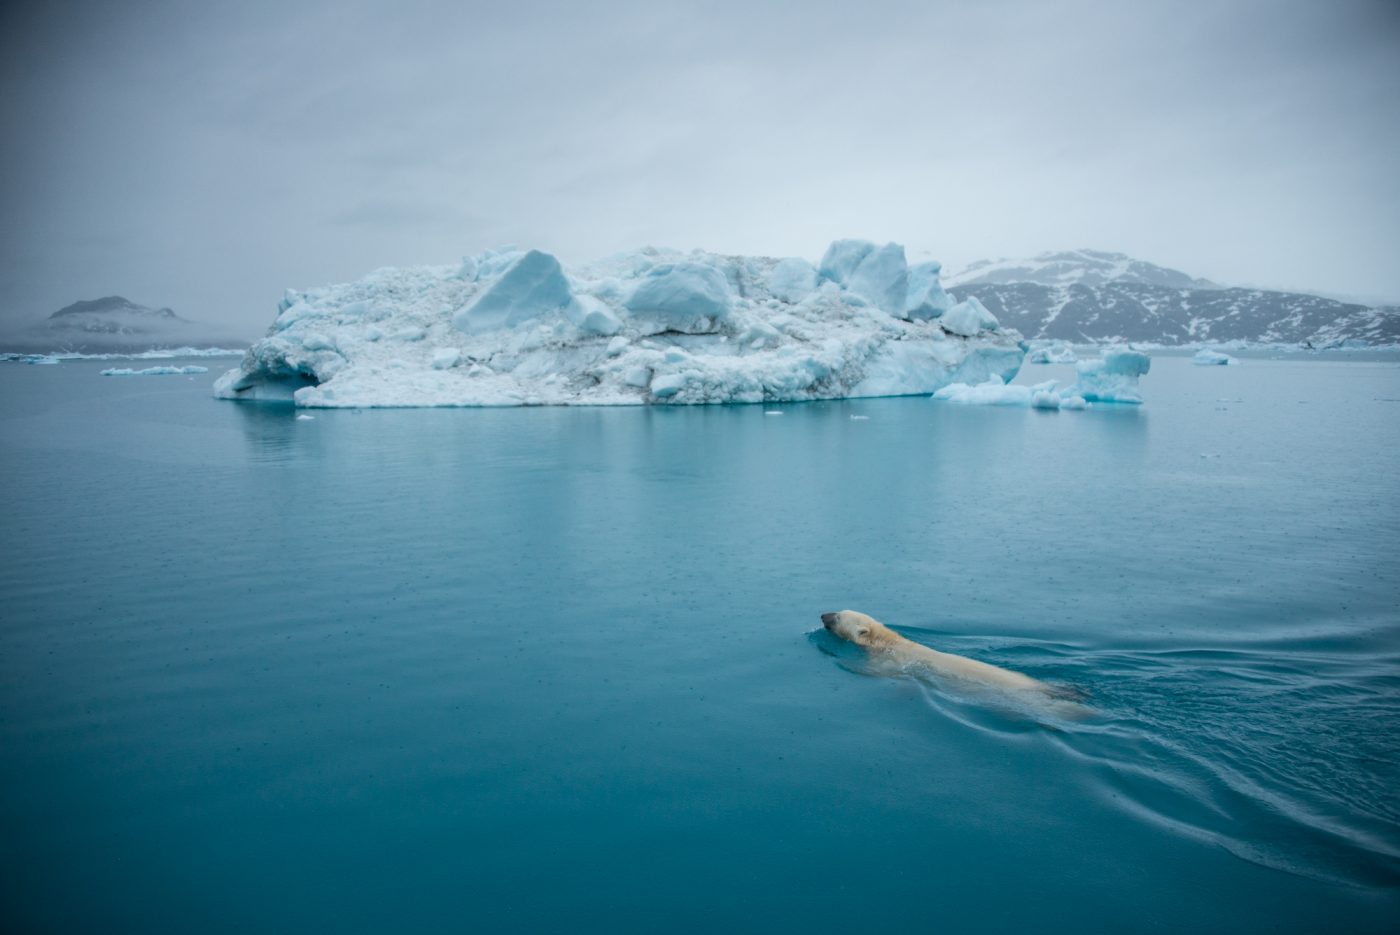 Polar bear swims in waters of Greenland. Photo by Andy Mann